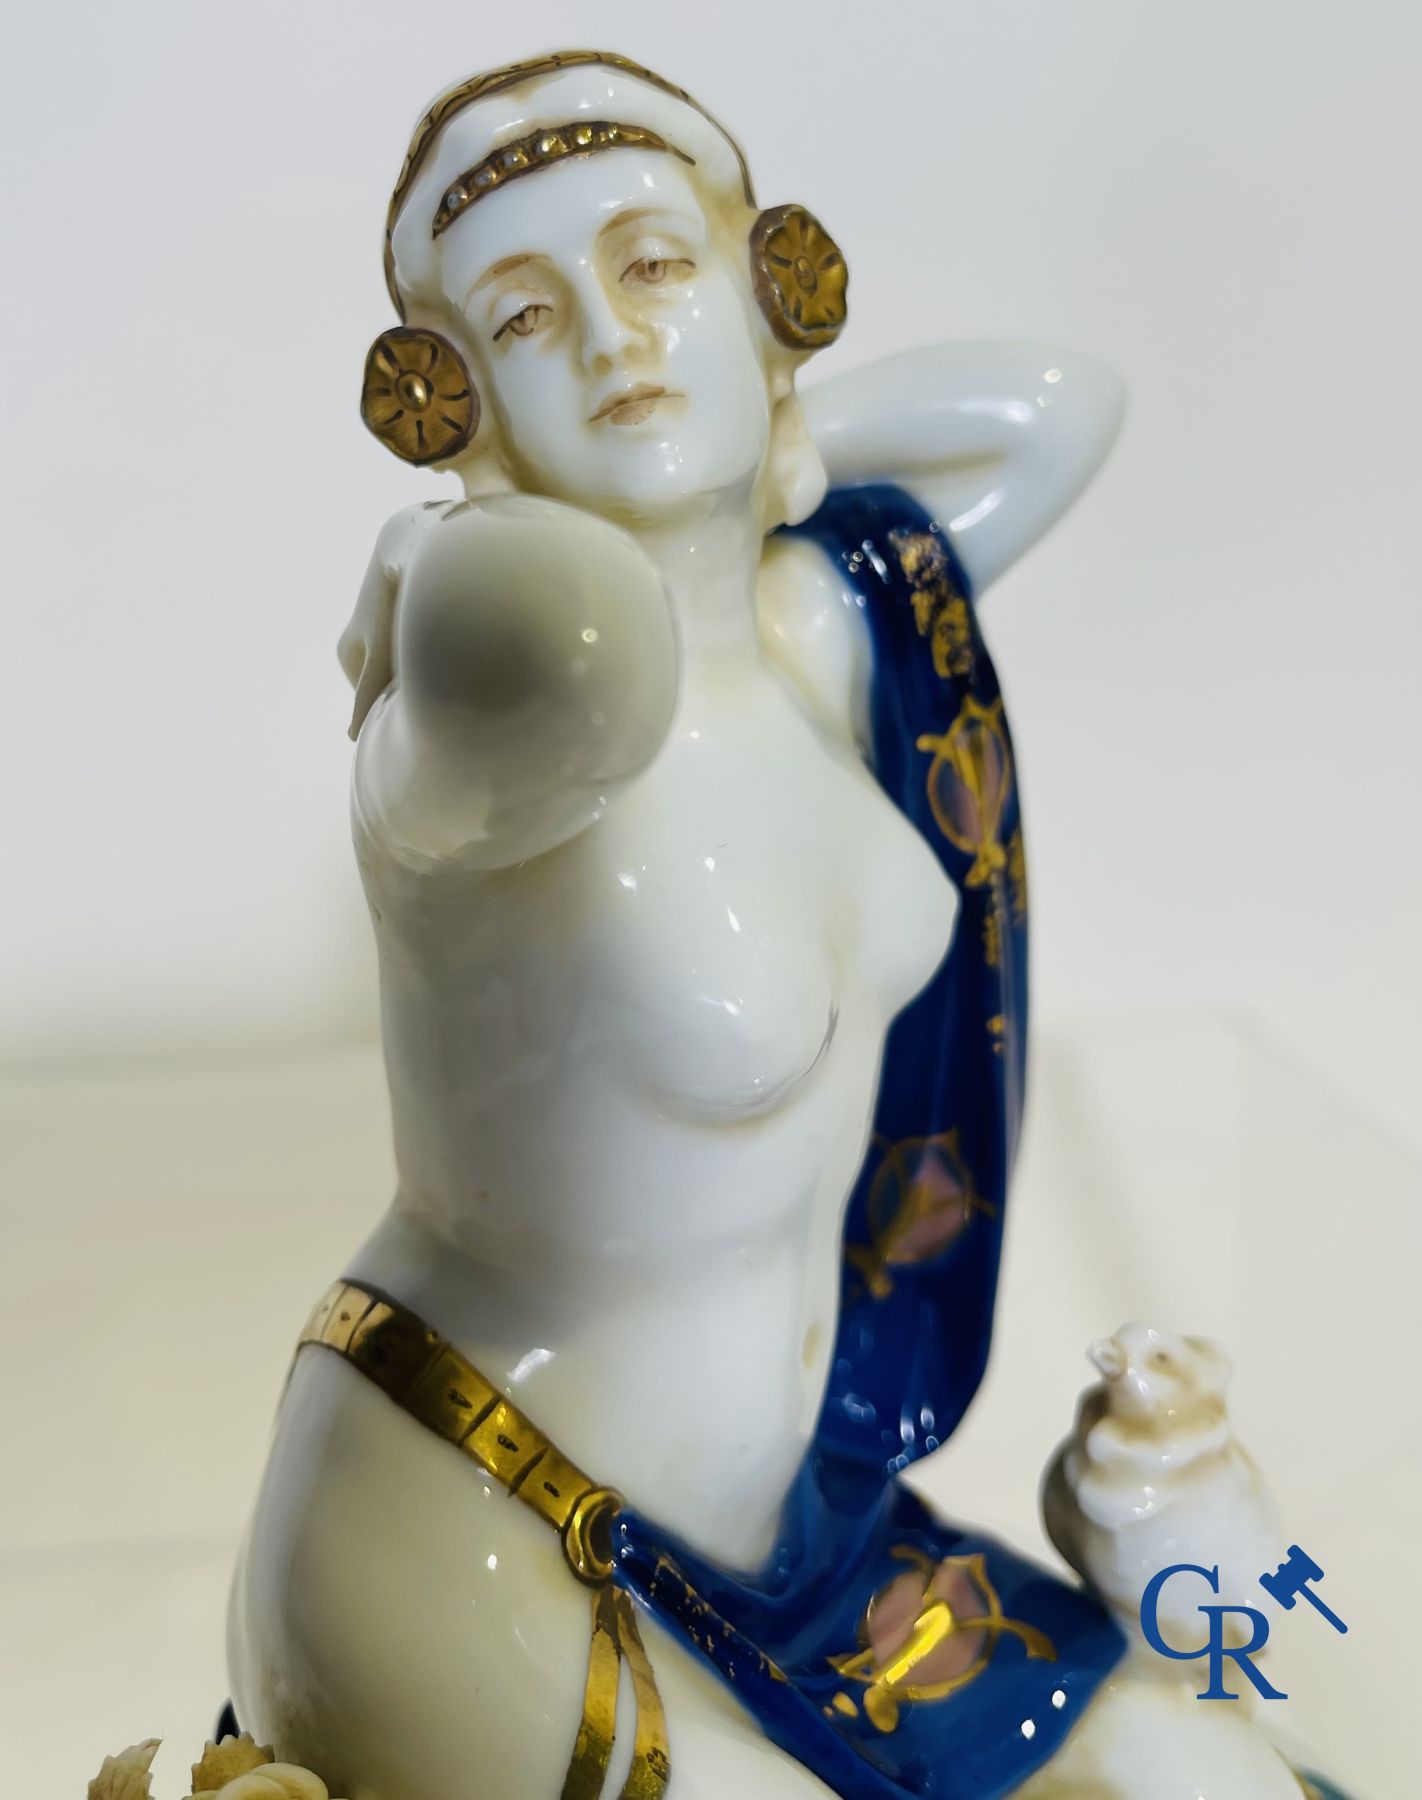 Art deco: An art deco sculpture in finely marked porcelain. - Image 7 of 9